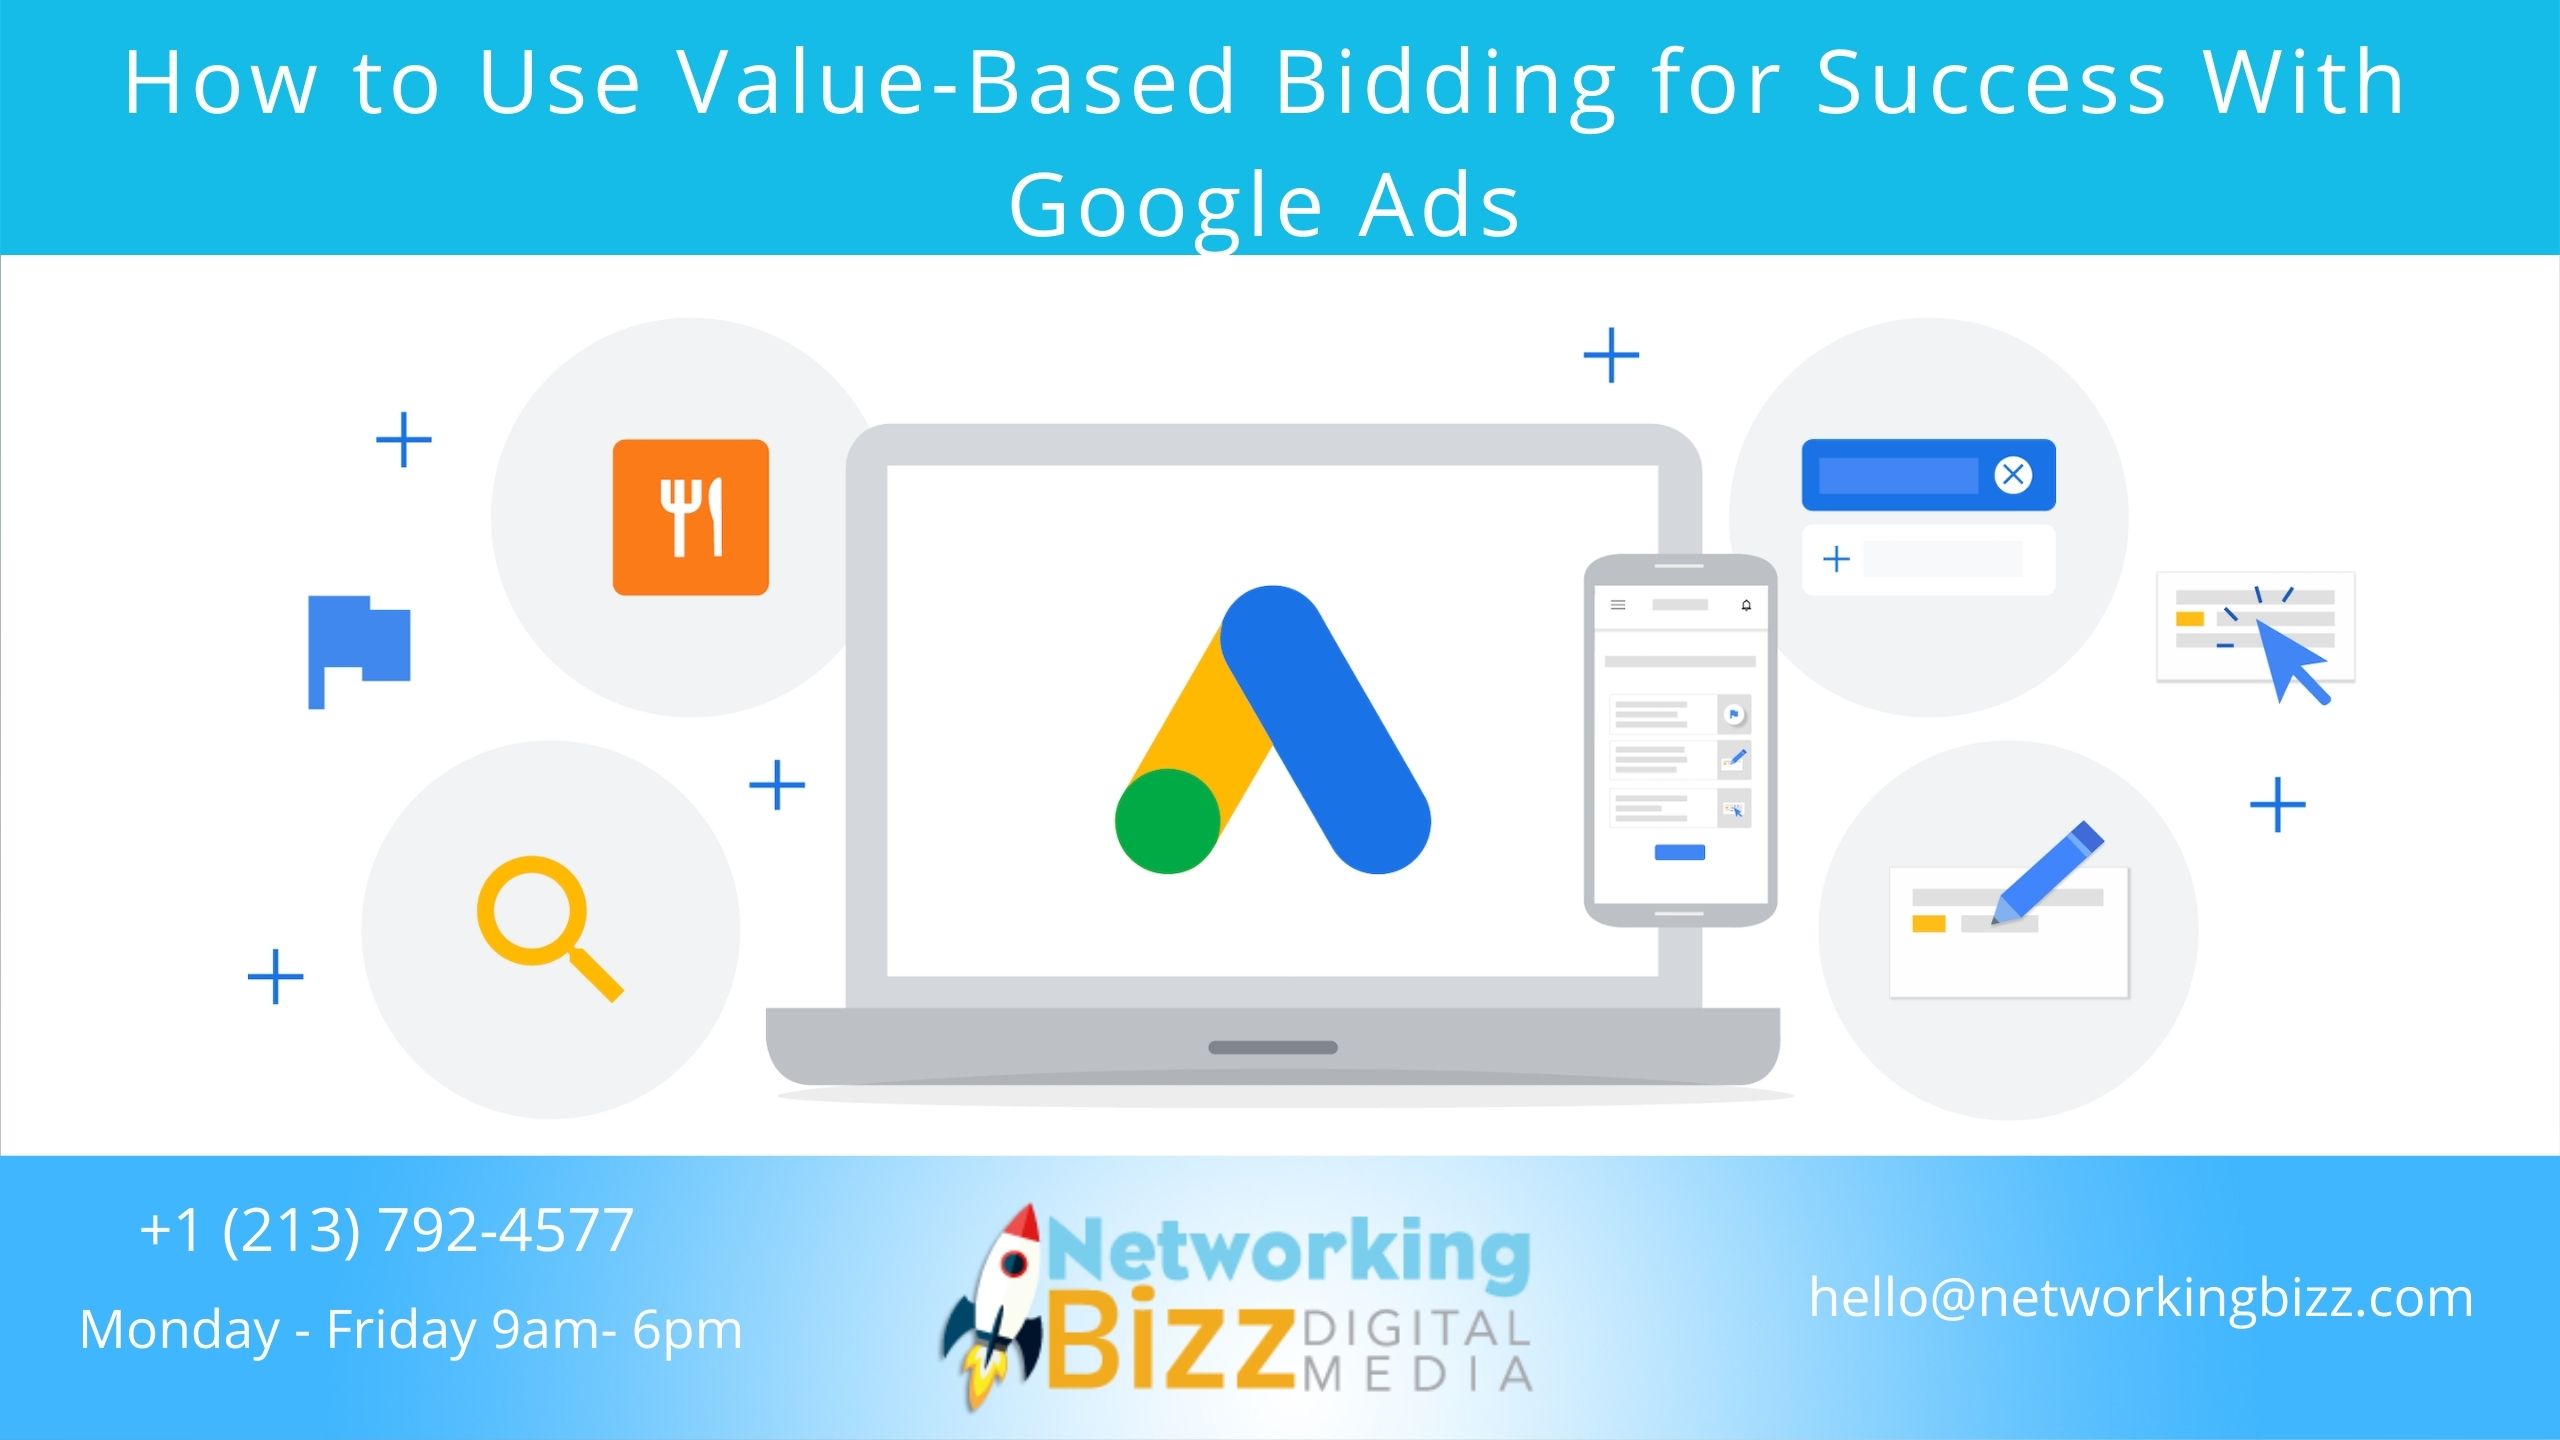 How to Use Value-Based Bidding for Success With Google Ads